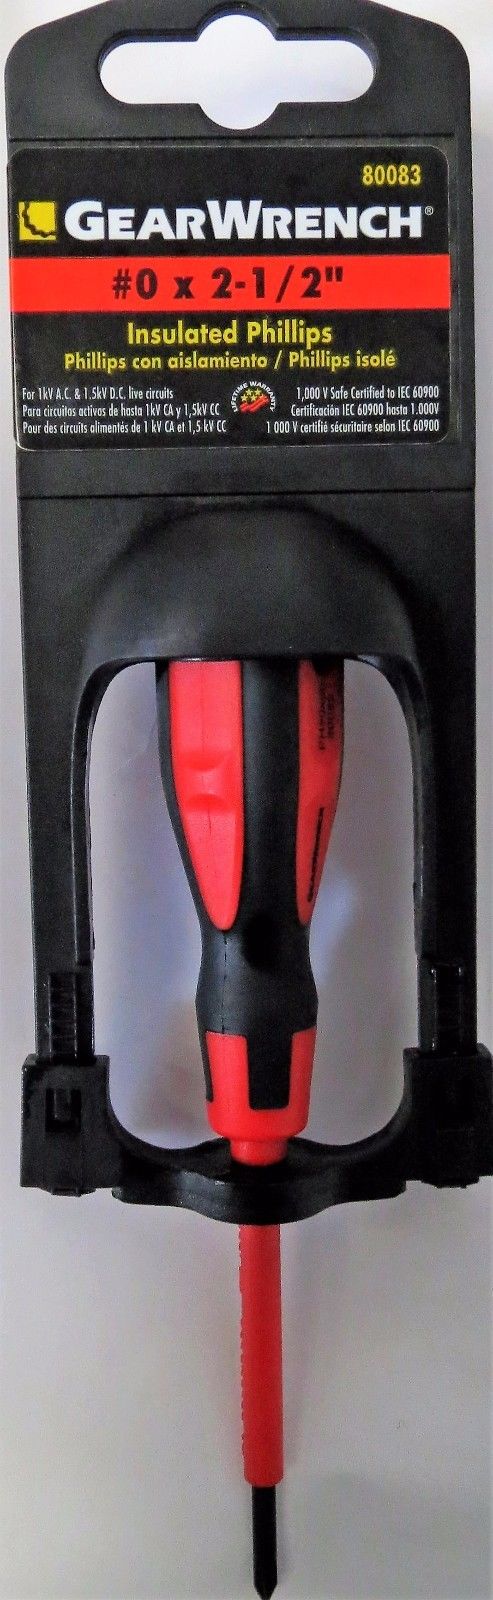 Gearwrench 80083 #0 x 2-1/2" Insulated Phillips Screwdriver 2PCS